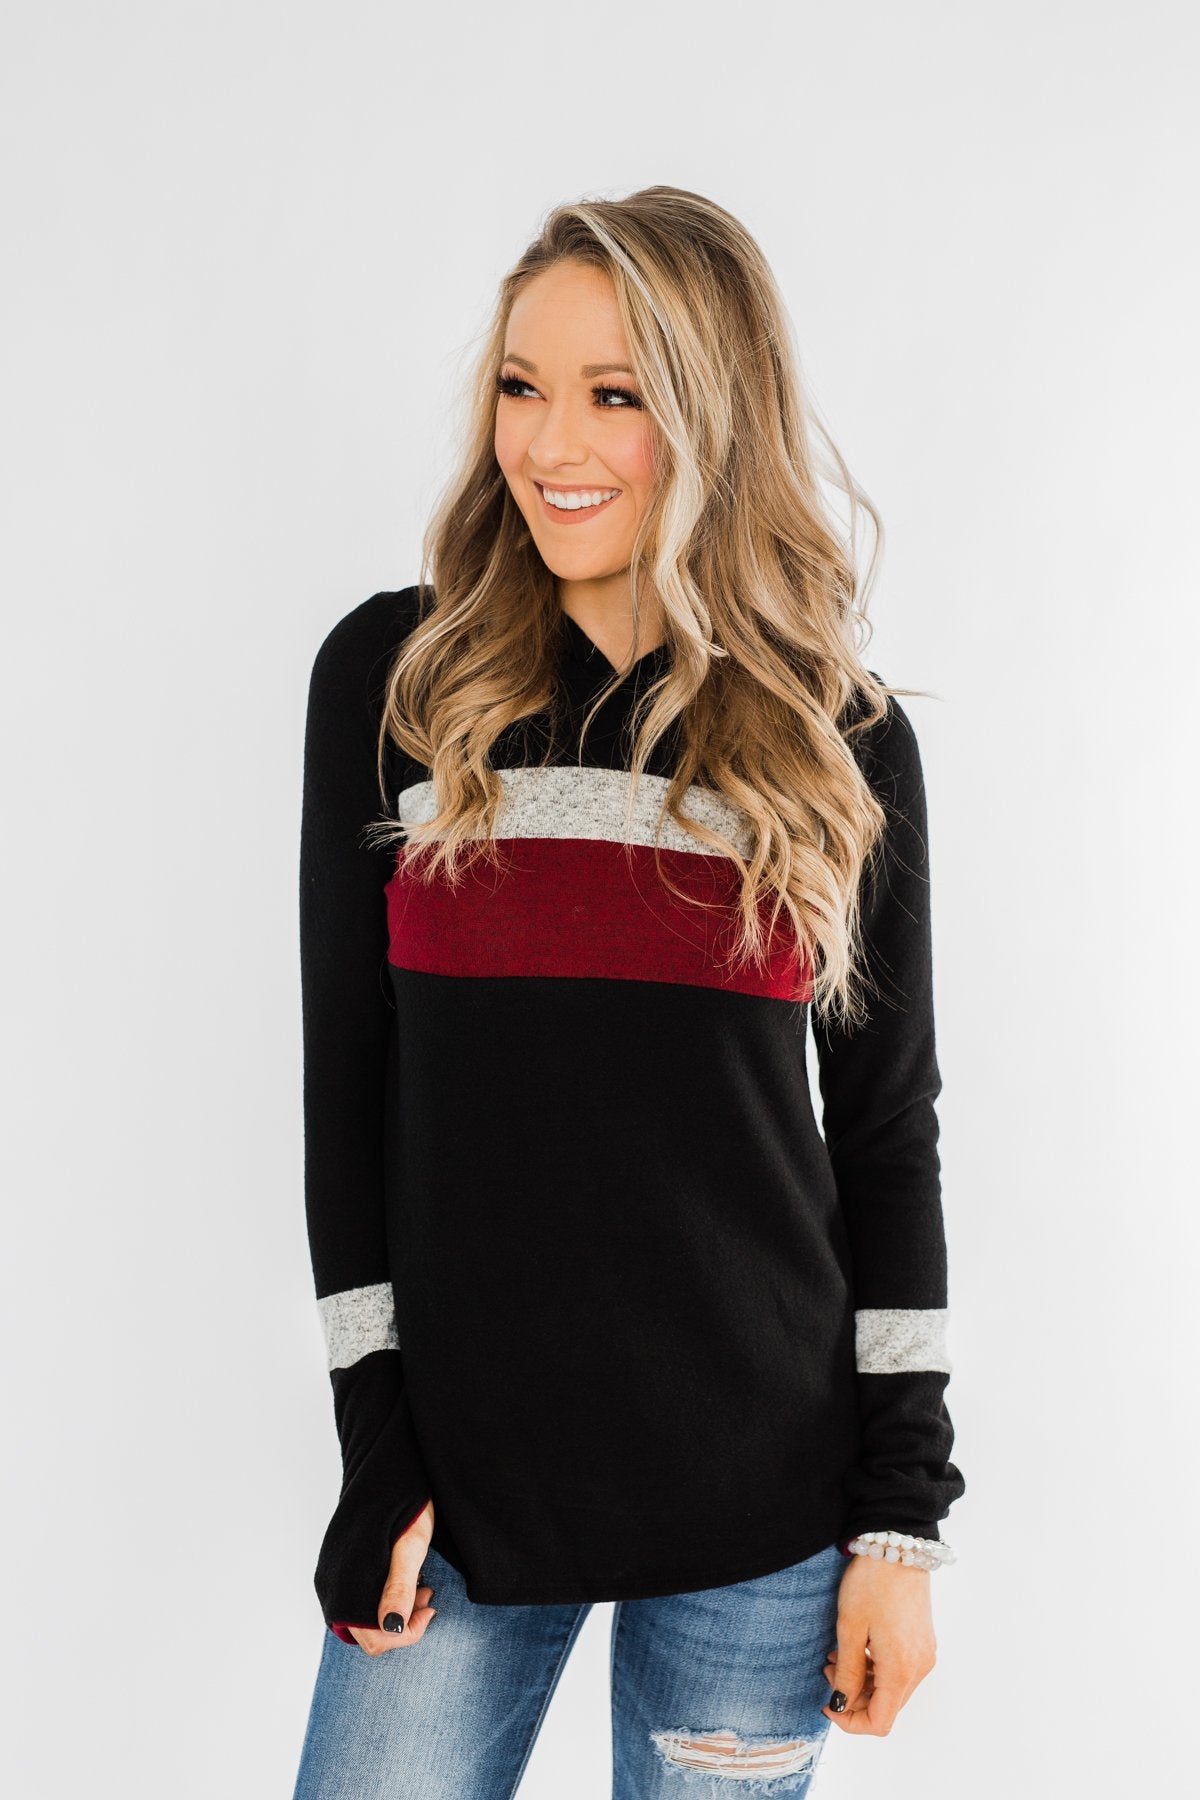 Only A Matter Of Time Hoodie- Black & Burgundy